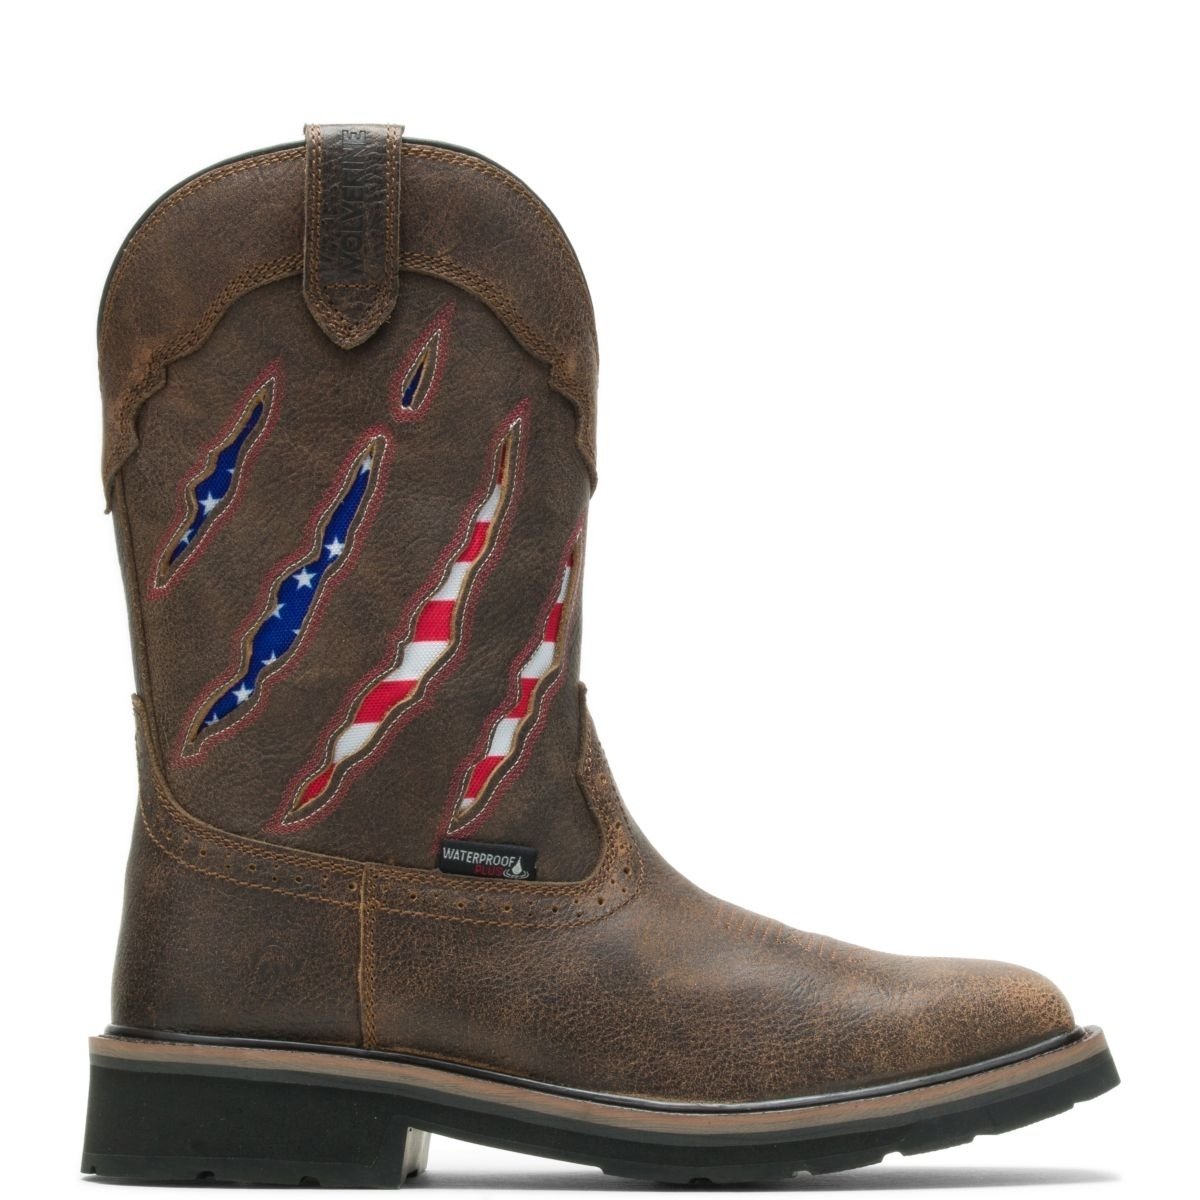 WOLVERINE Men's Rancher Claw Wellington Soft Toe Work Boot Brown/Flag - W200138 Flag/brown - Flag/brown, 12 X-Wide